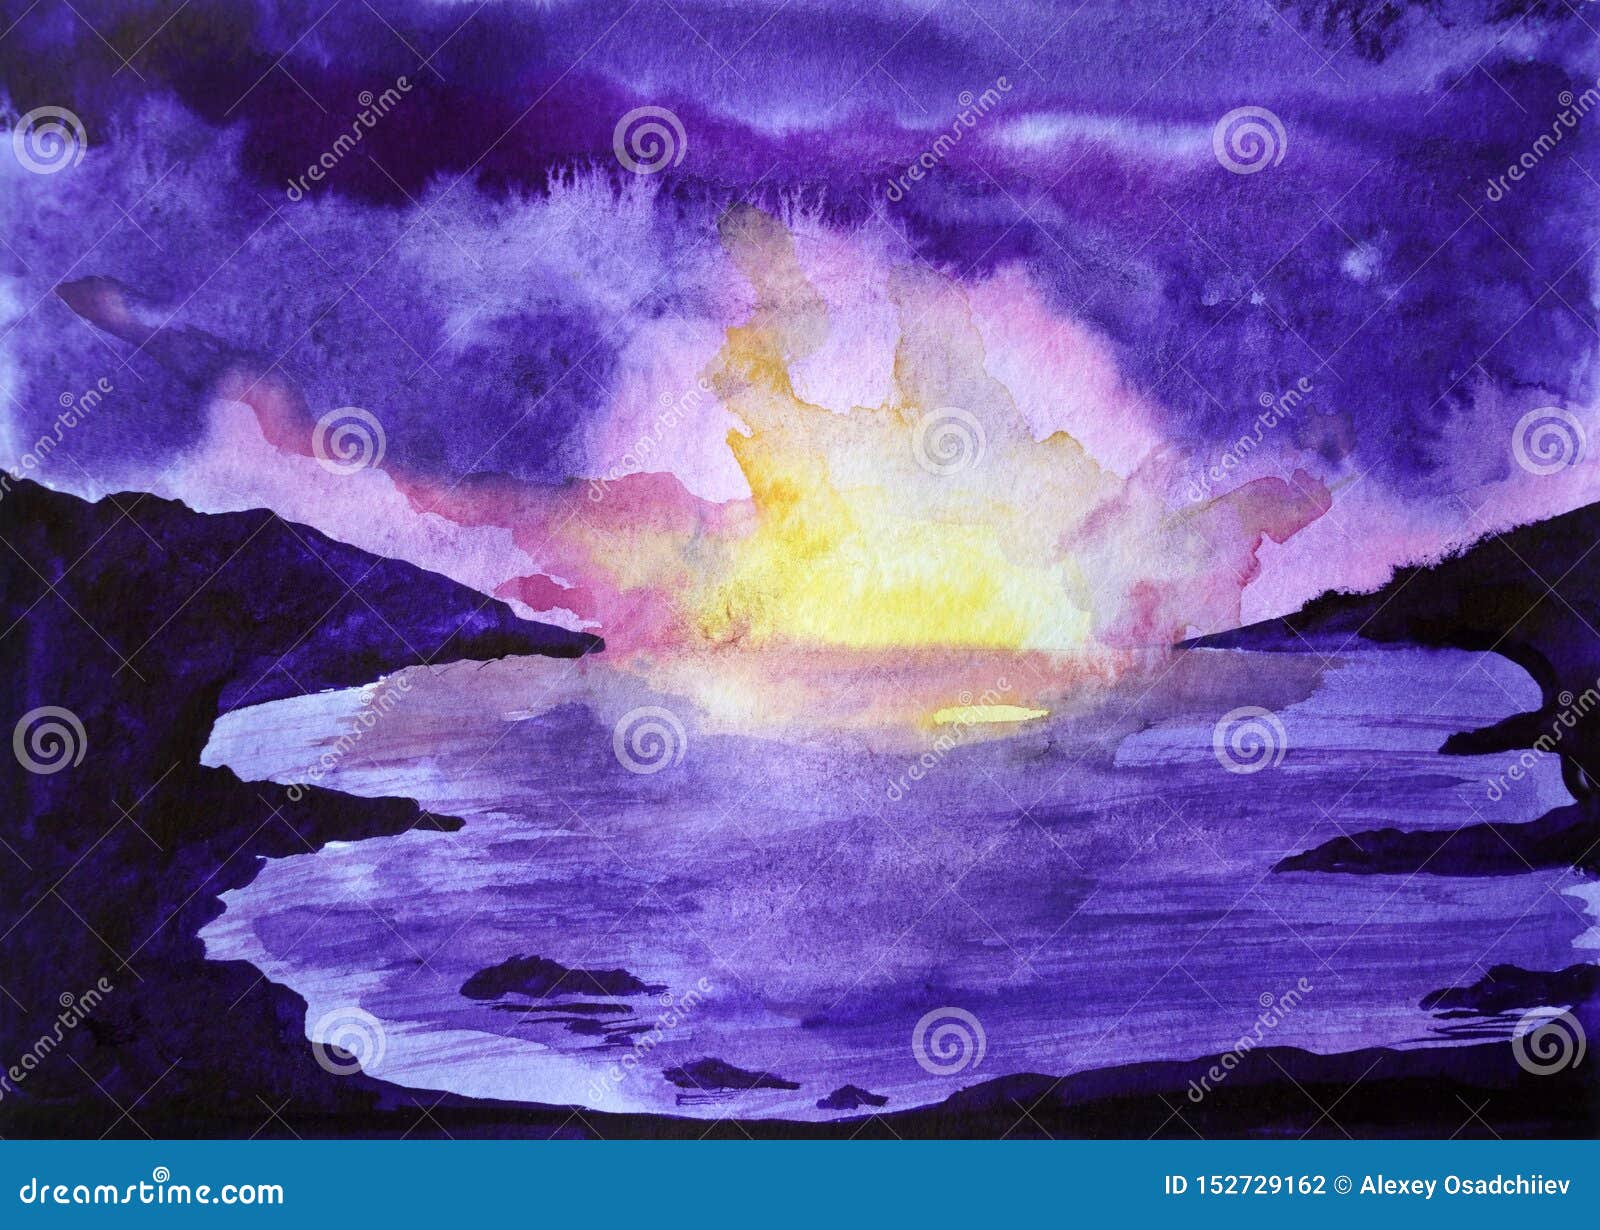 Drawing Of Bright Sunset Sunrise Over The Sea Stock Illustration